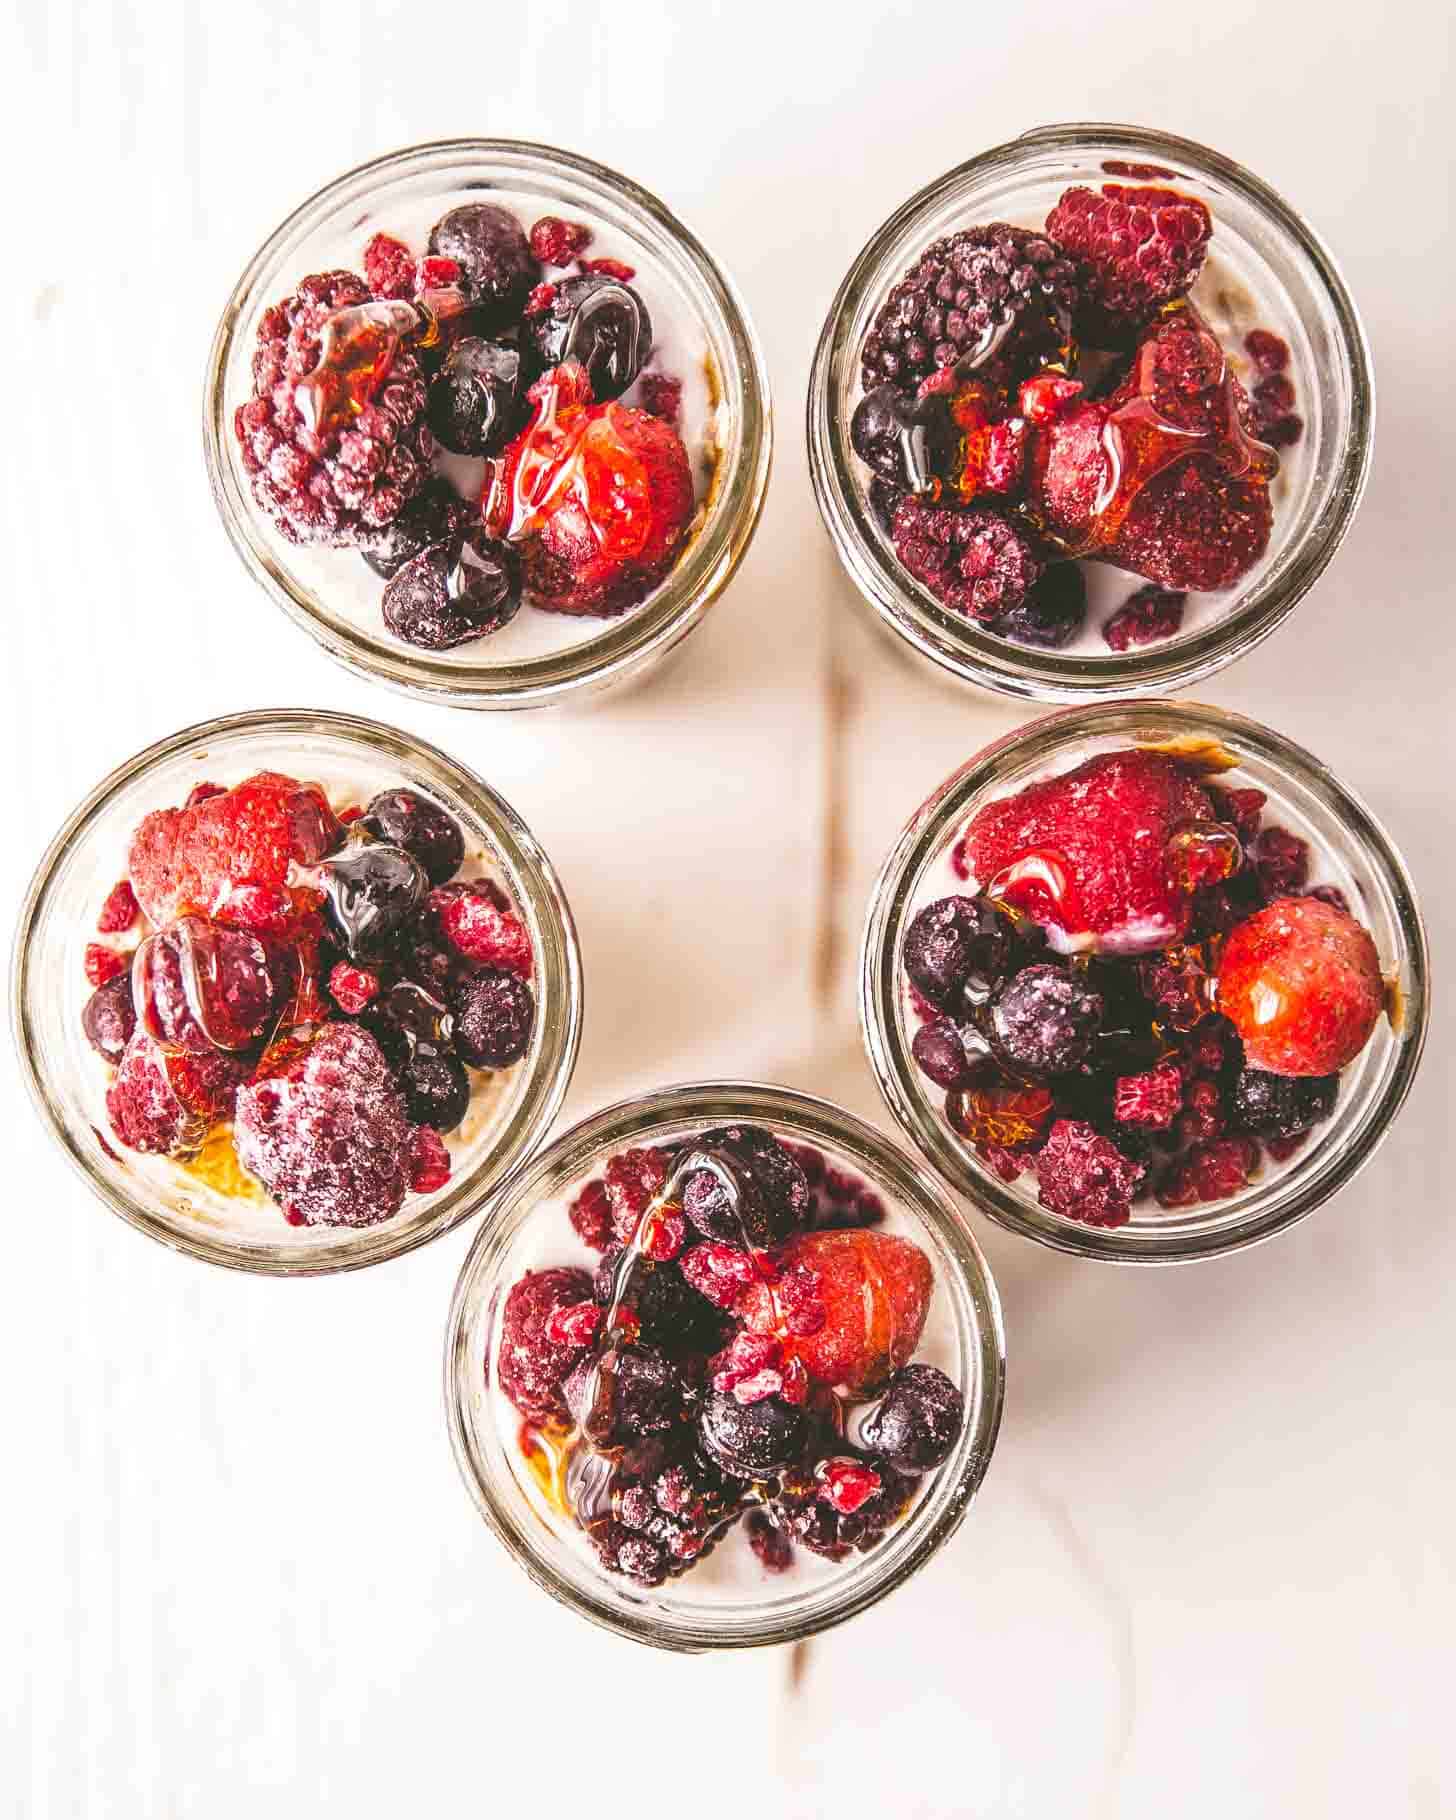 mason jars of overnight oats topped with berries